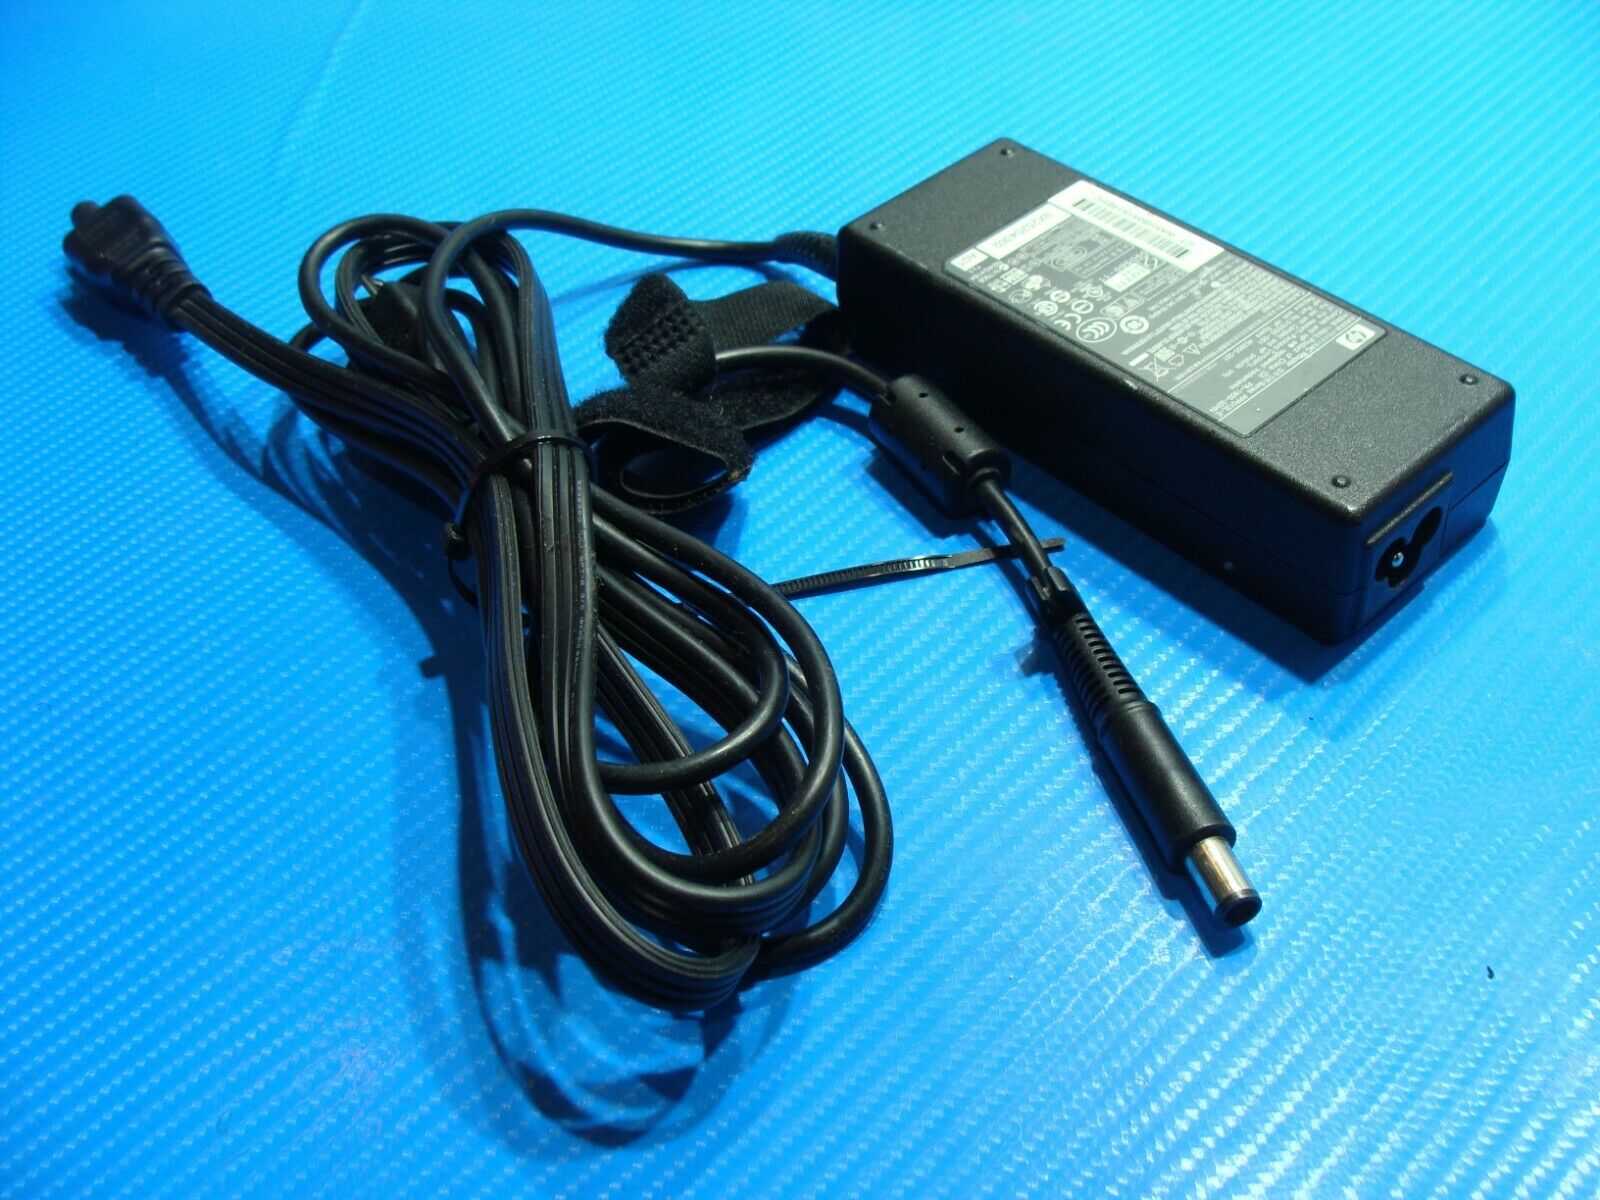 Genuine HP AC Power Adapter Charger 90w P/N 519330-001 608428-002 19V 4.74A 